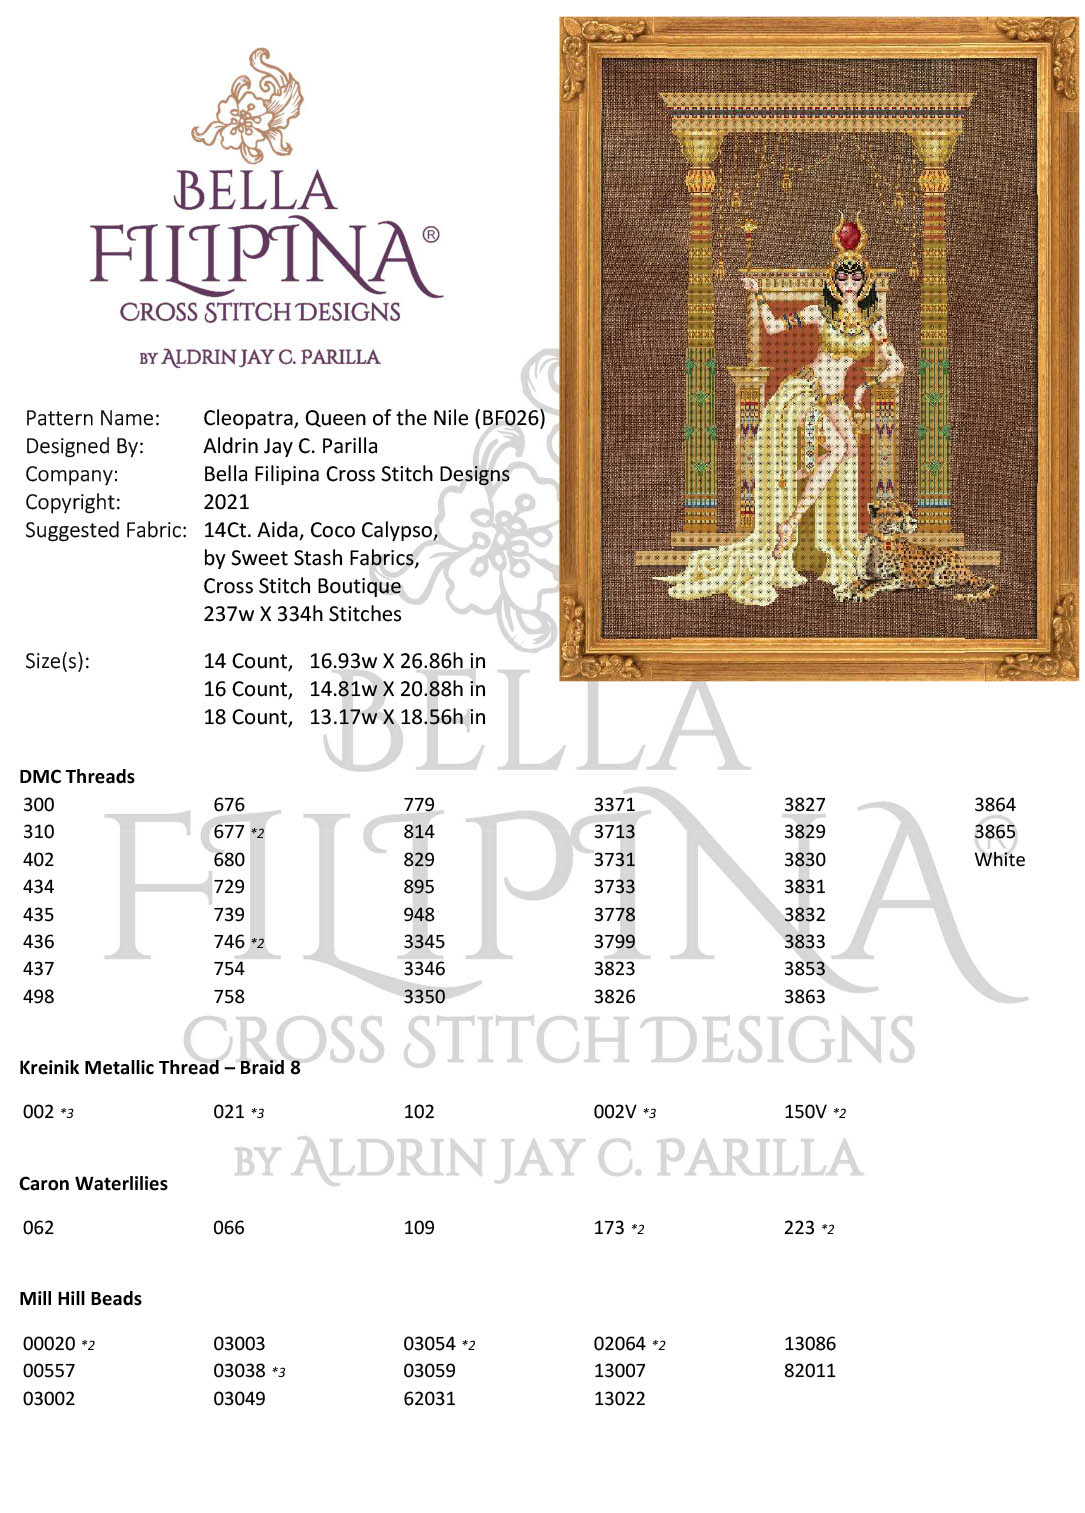 BF026 Bella Filipina-Cleopatra, Queen of the Nile